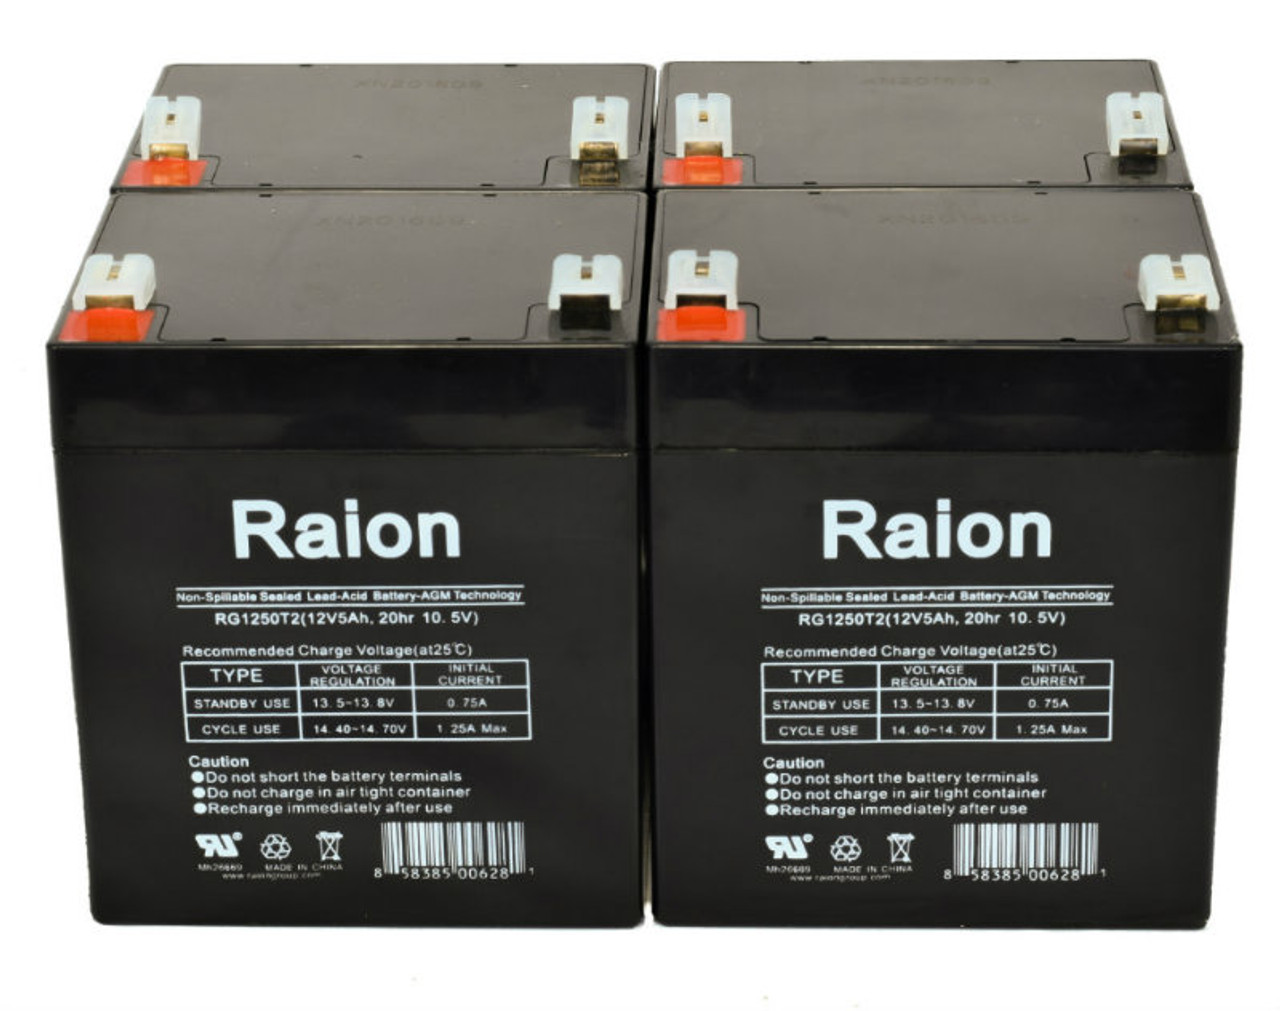 Raion Power 12V 5Ah RG1250T2 Replacement Lead Acid Battery for Raion Power RG1250T2 - 4 Pack